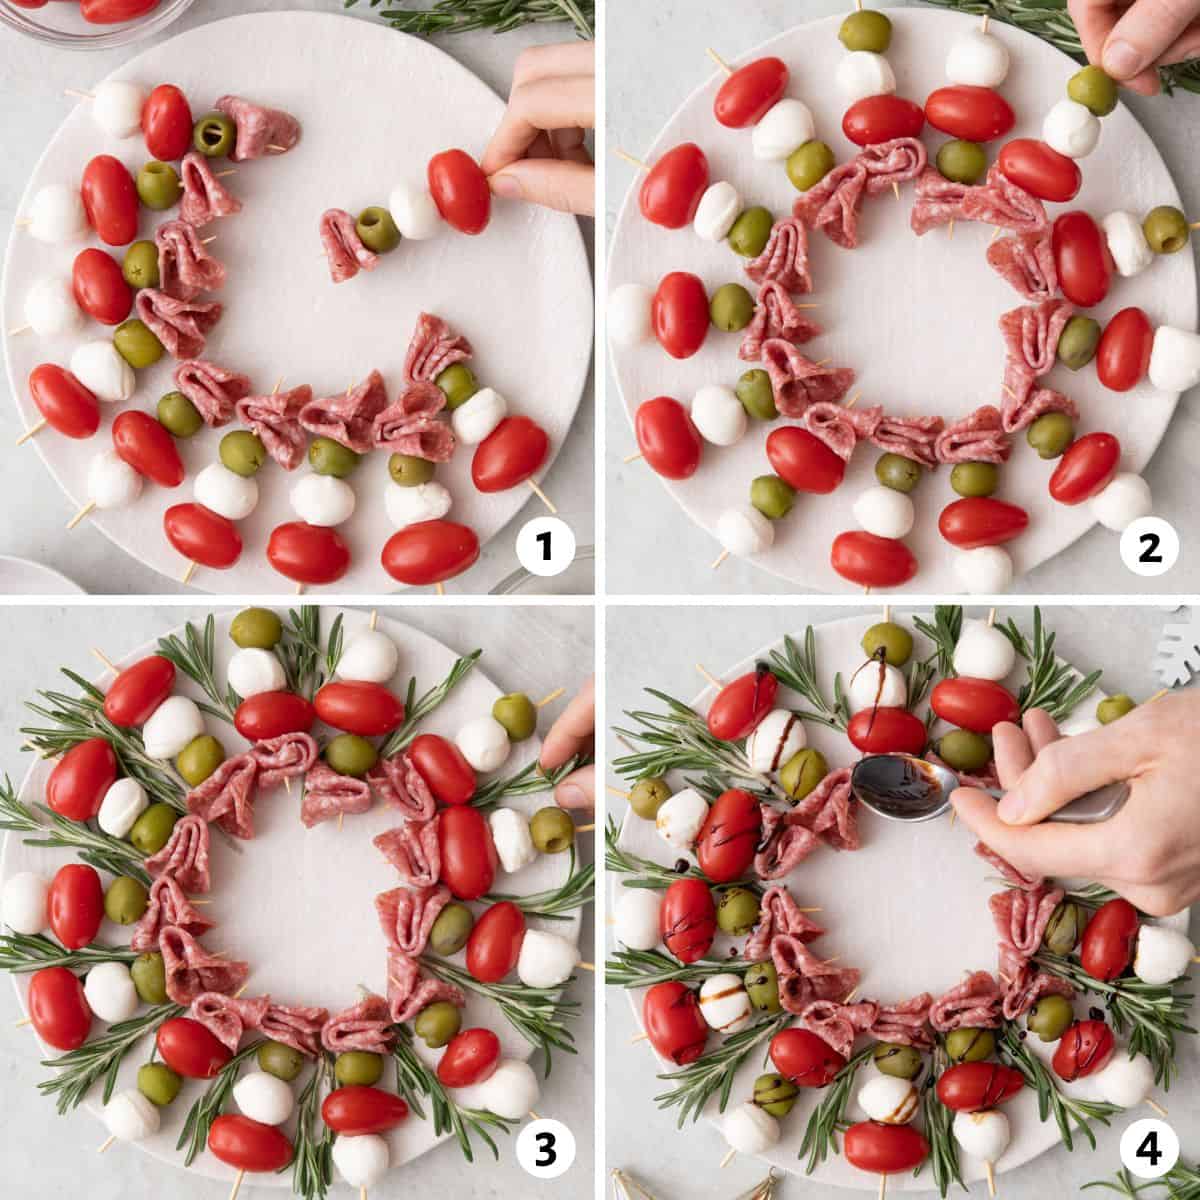 4 image collage adding skewers of salami, olive, mozzerella balls, and tomatoes to a plate to form a wreath around the edges.